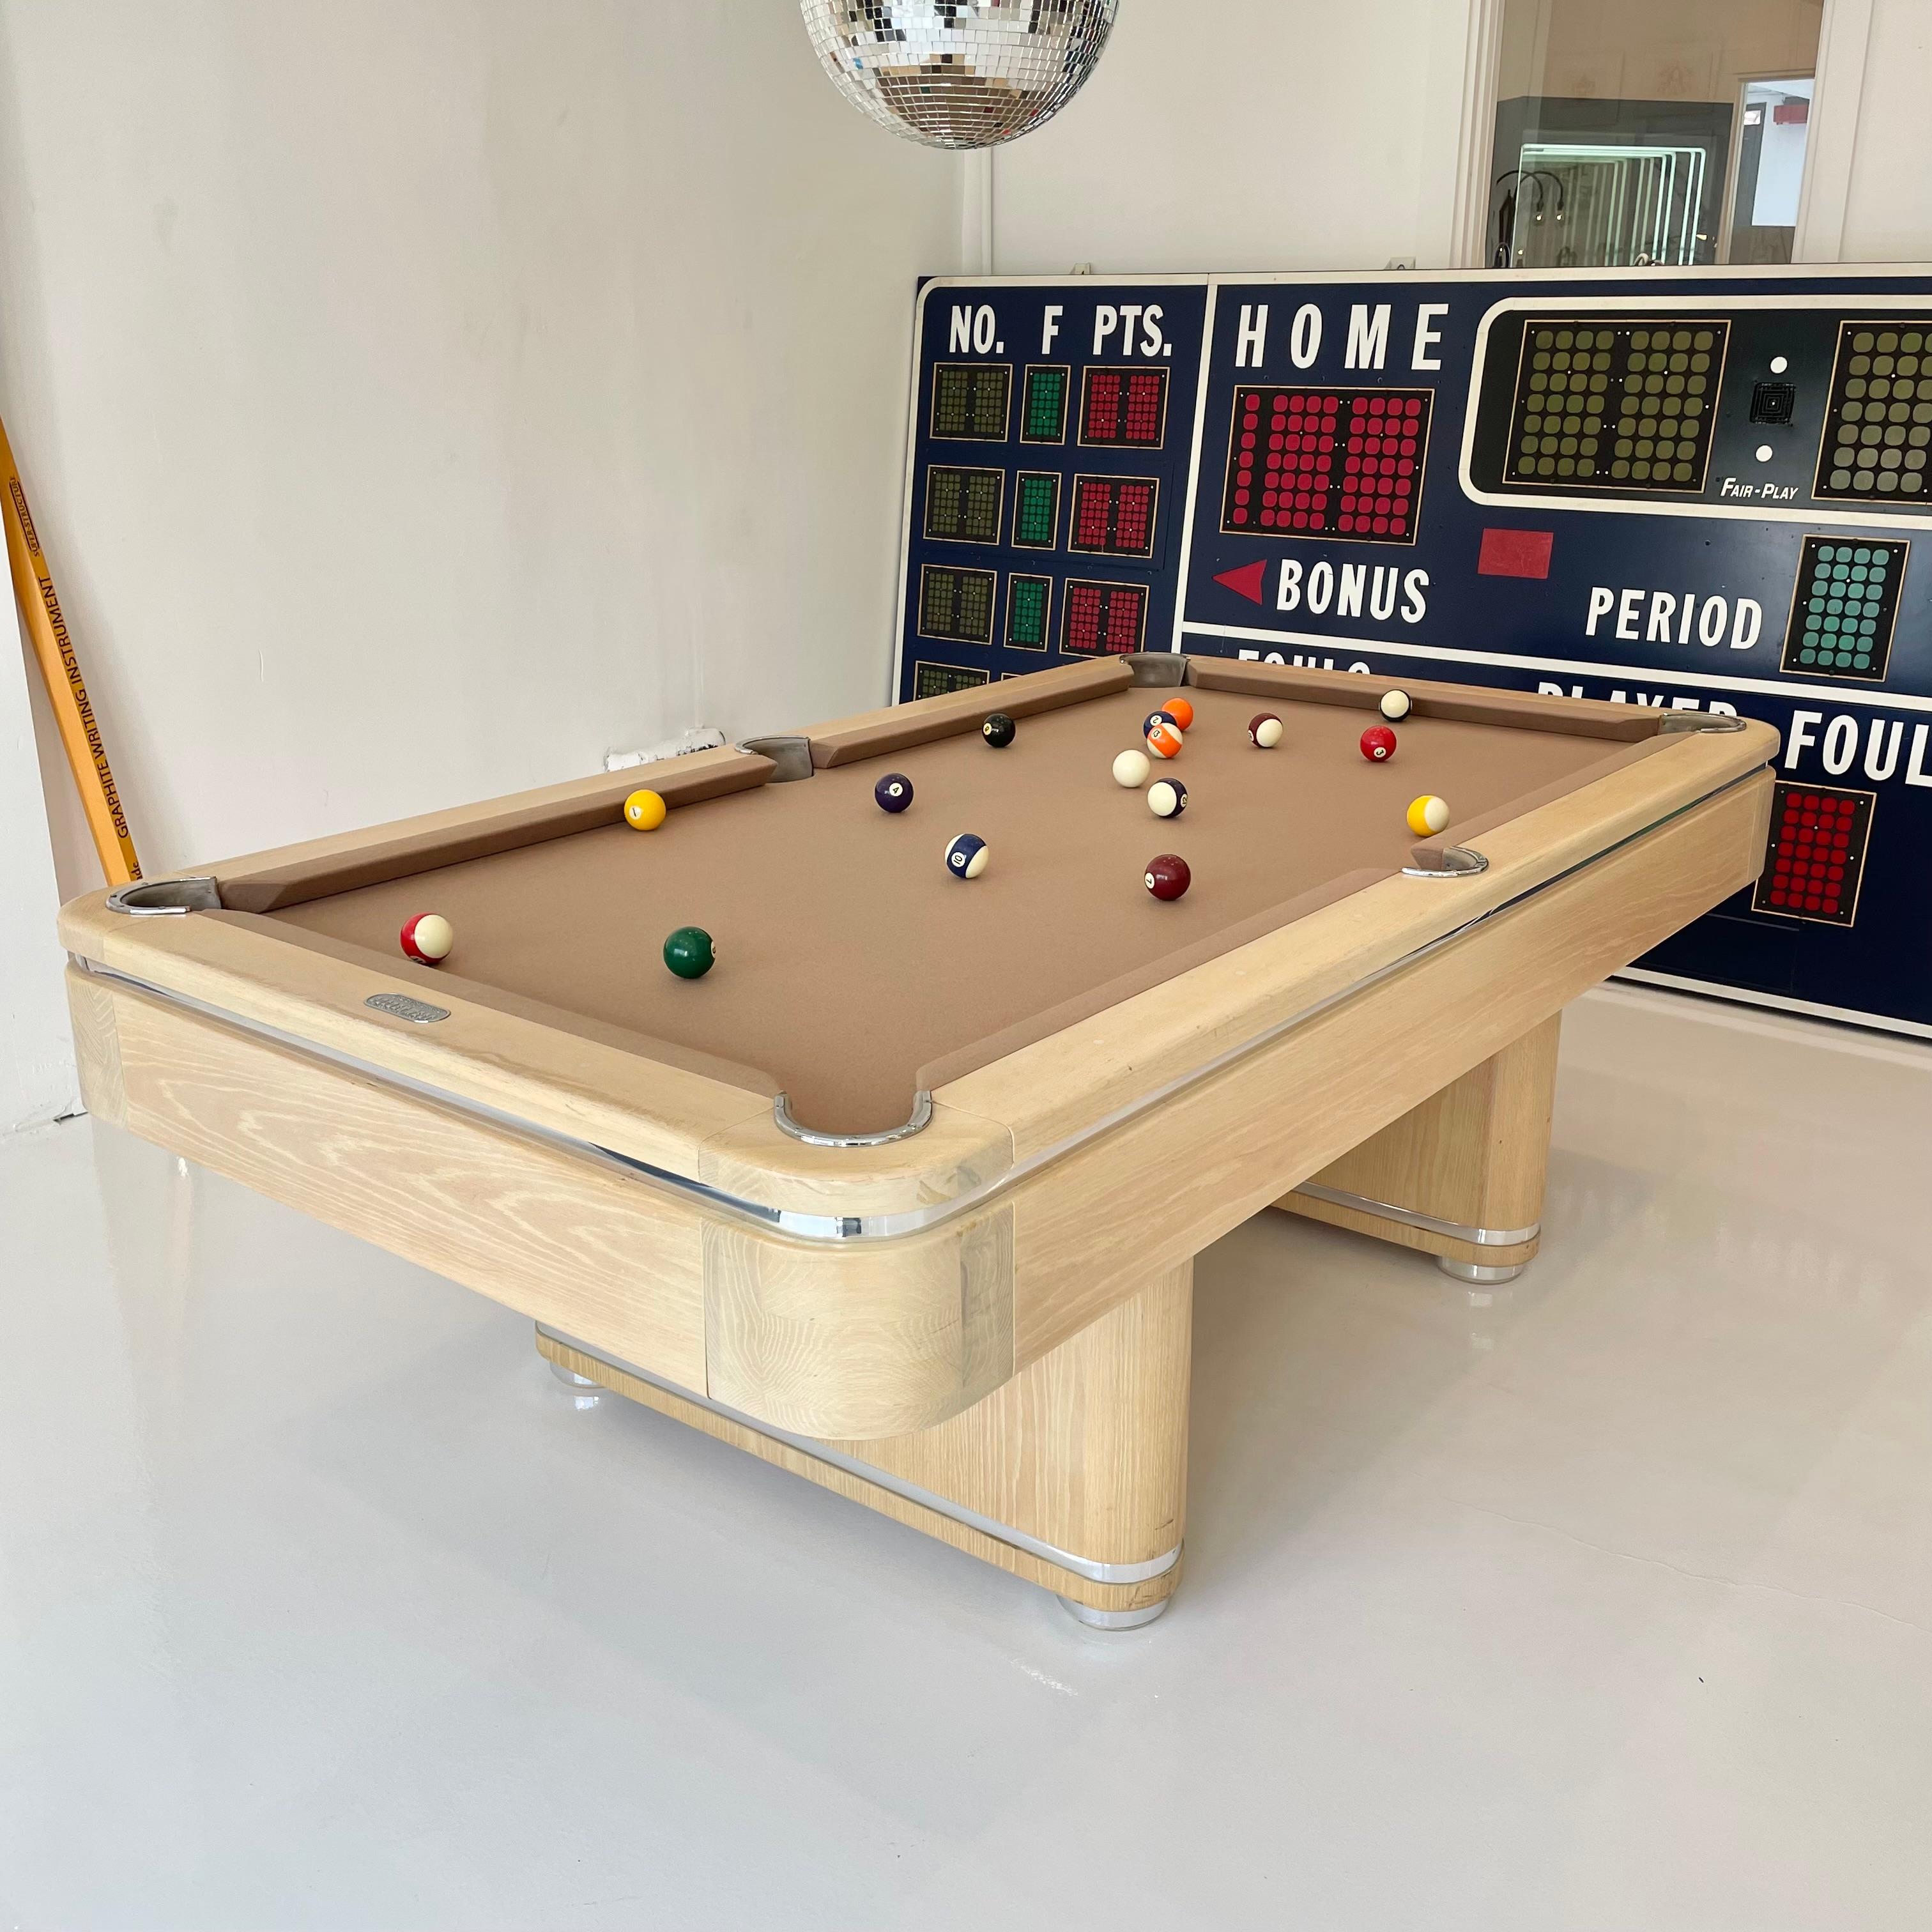 Wonderfully chic Cherry wood and chrome Golden West pool table made in Canoga Park, California as part of Golden West's 